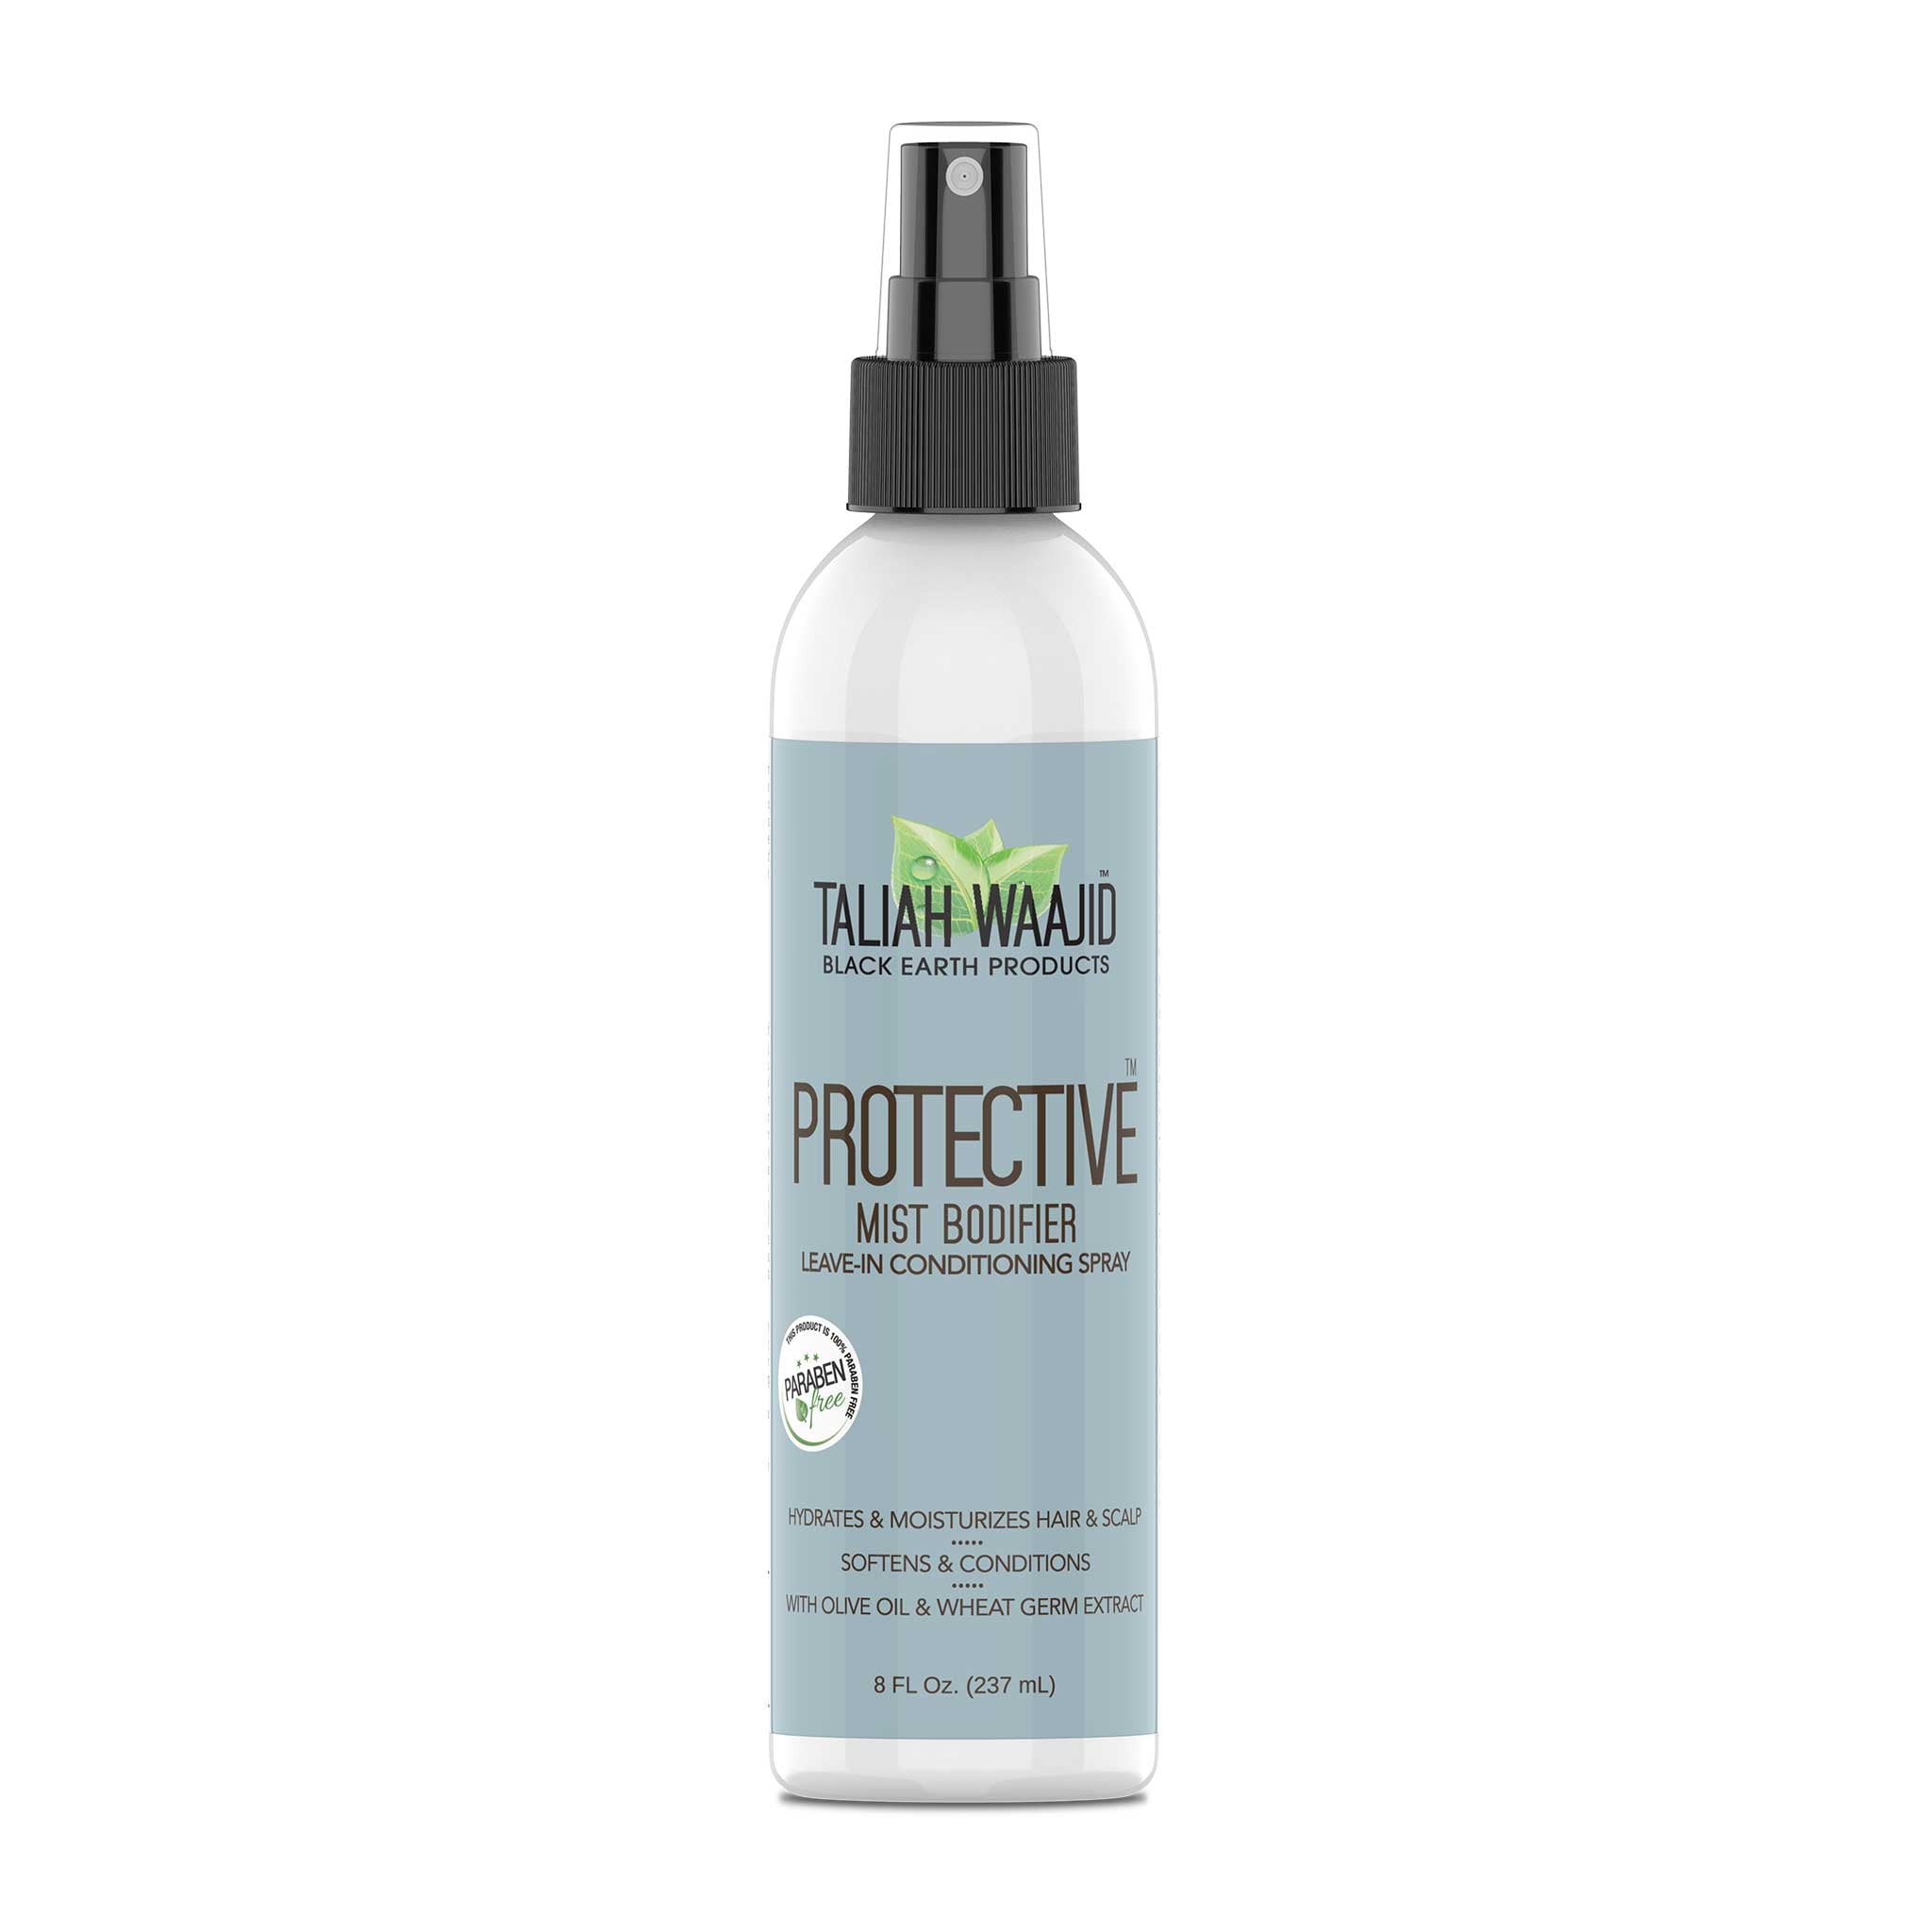 Black Earth Products Protective Mist Bodifier 8oz